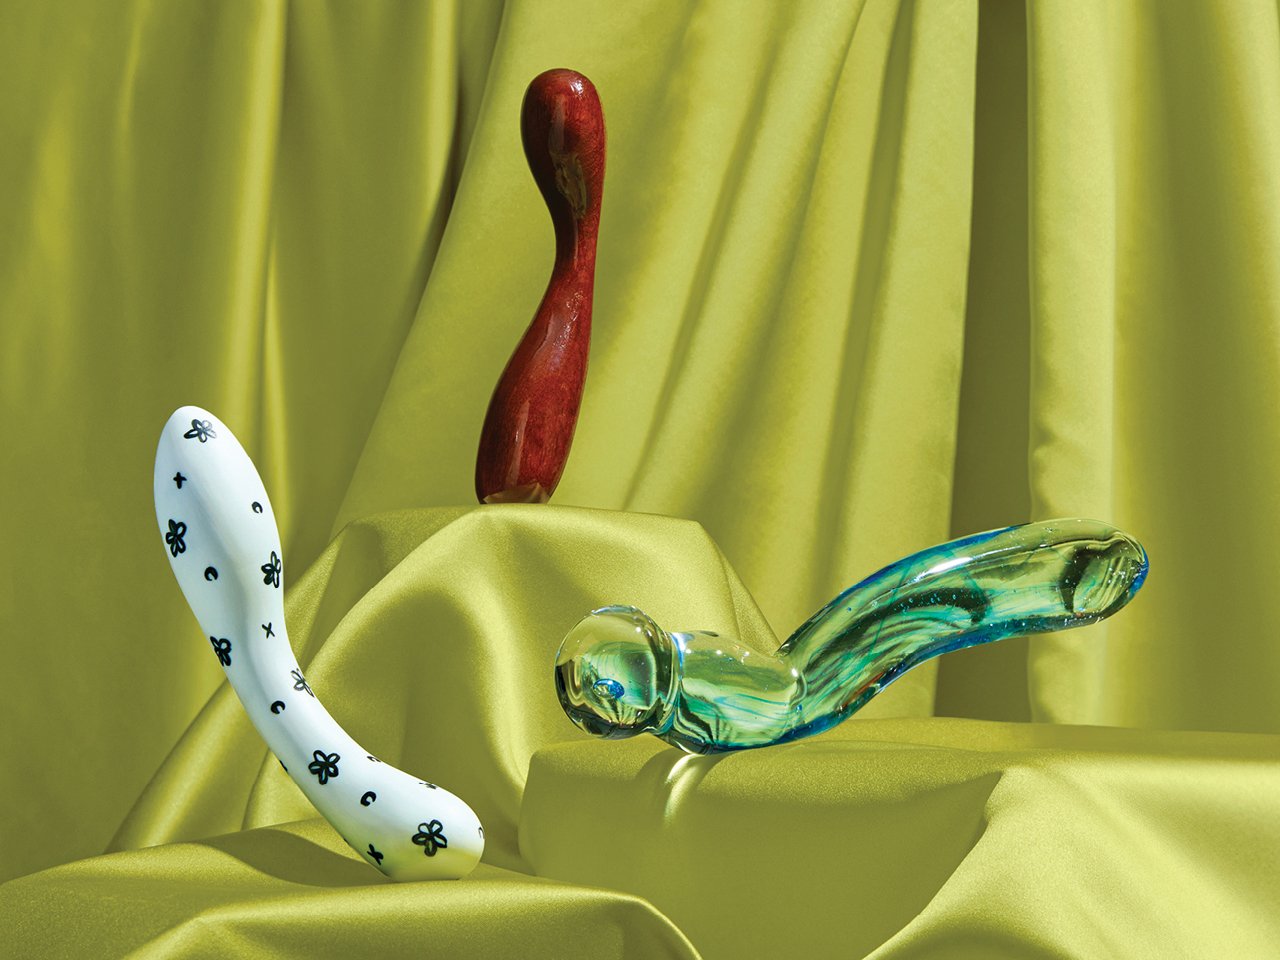 Three dildoes—one white with black flowers, one cherry wood and one green glass—against a chartreuse curtain backdrop